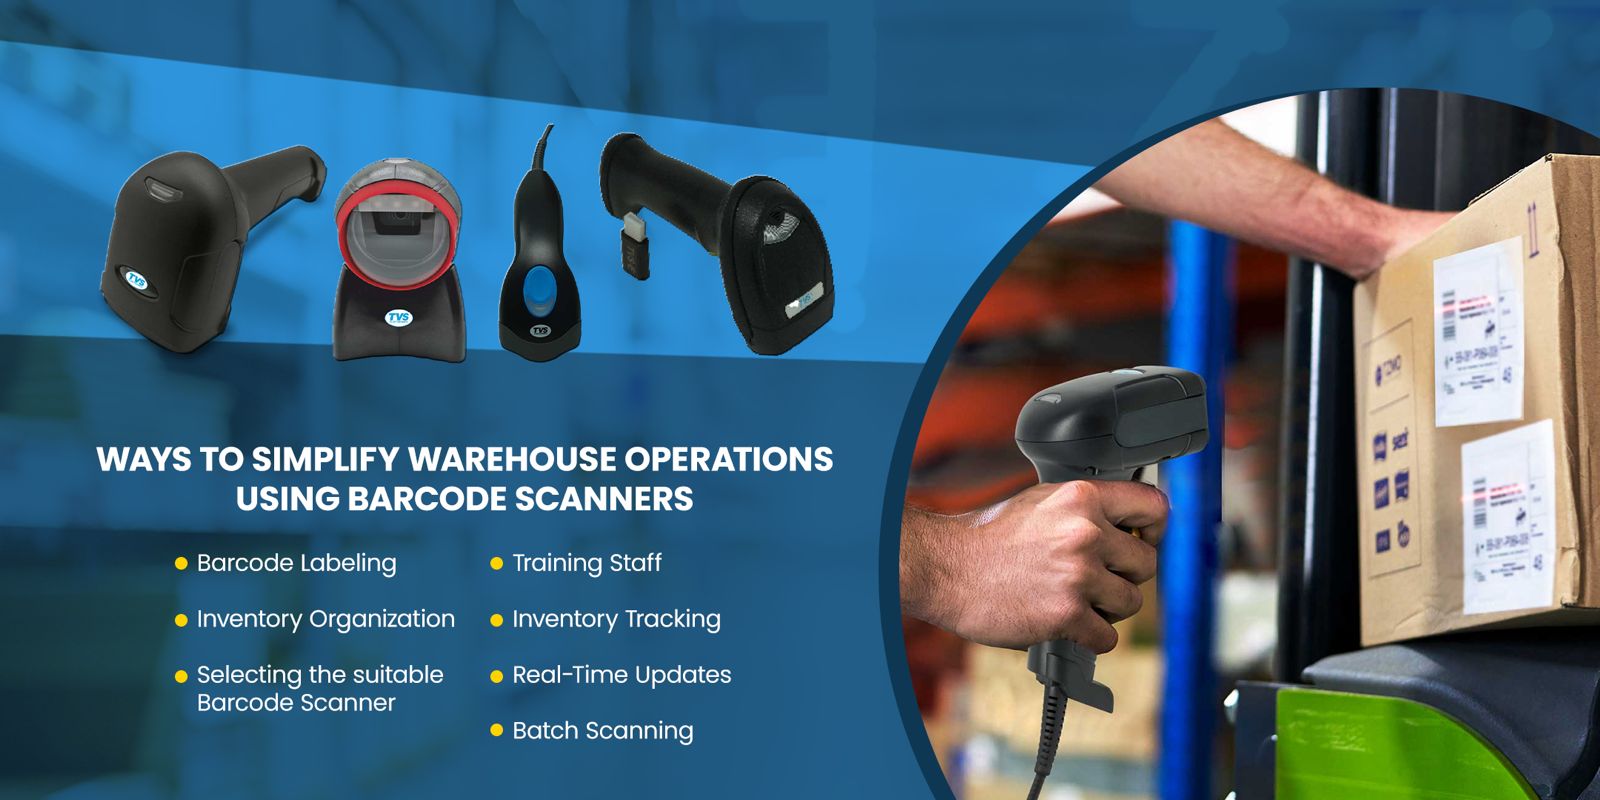 How to easily manage warehouse operations using barcode scanners?